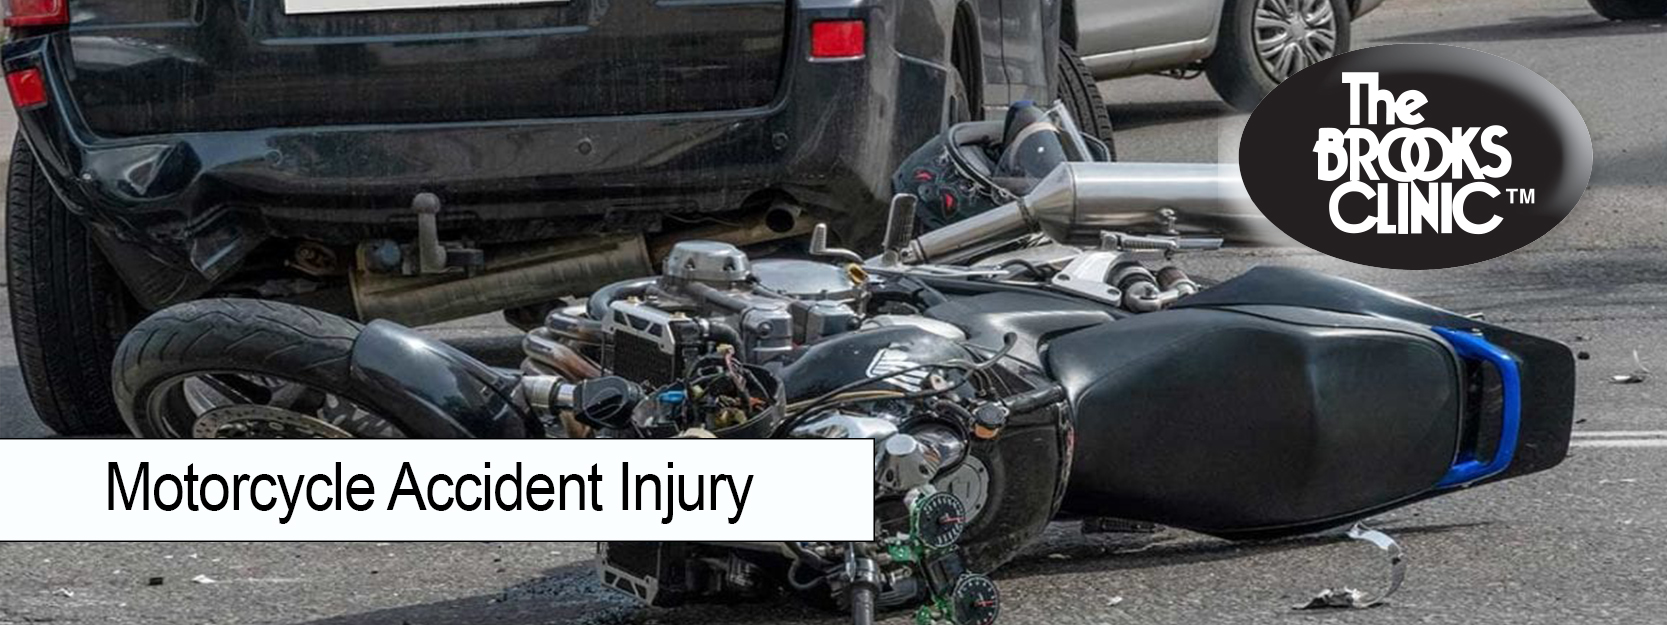 motorcycle accident injury treatment